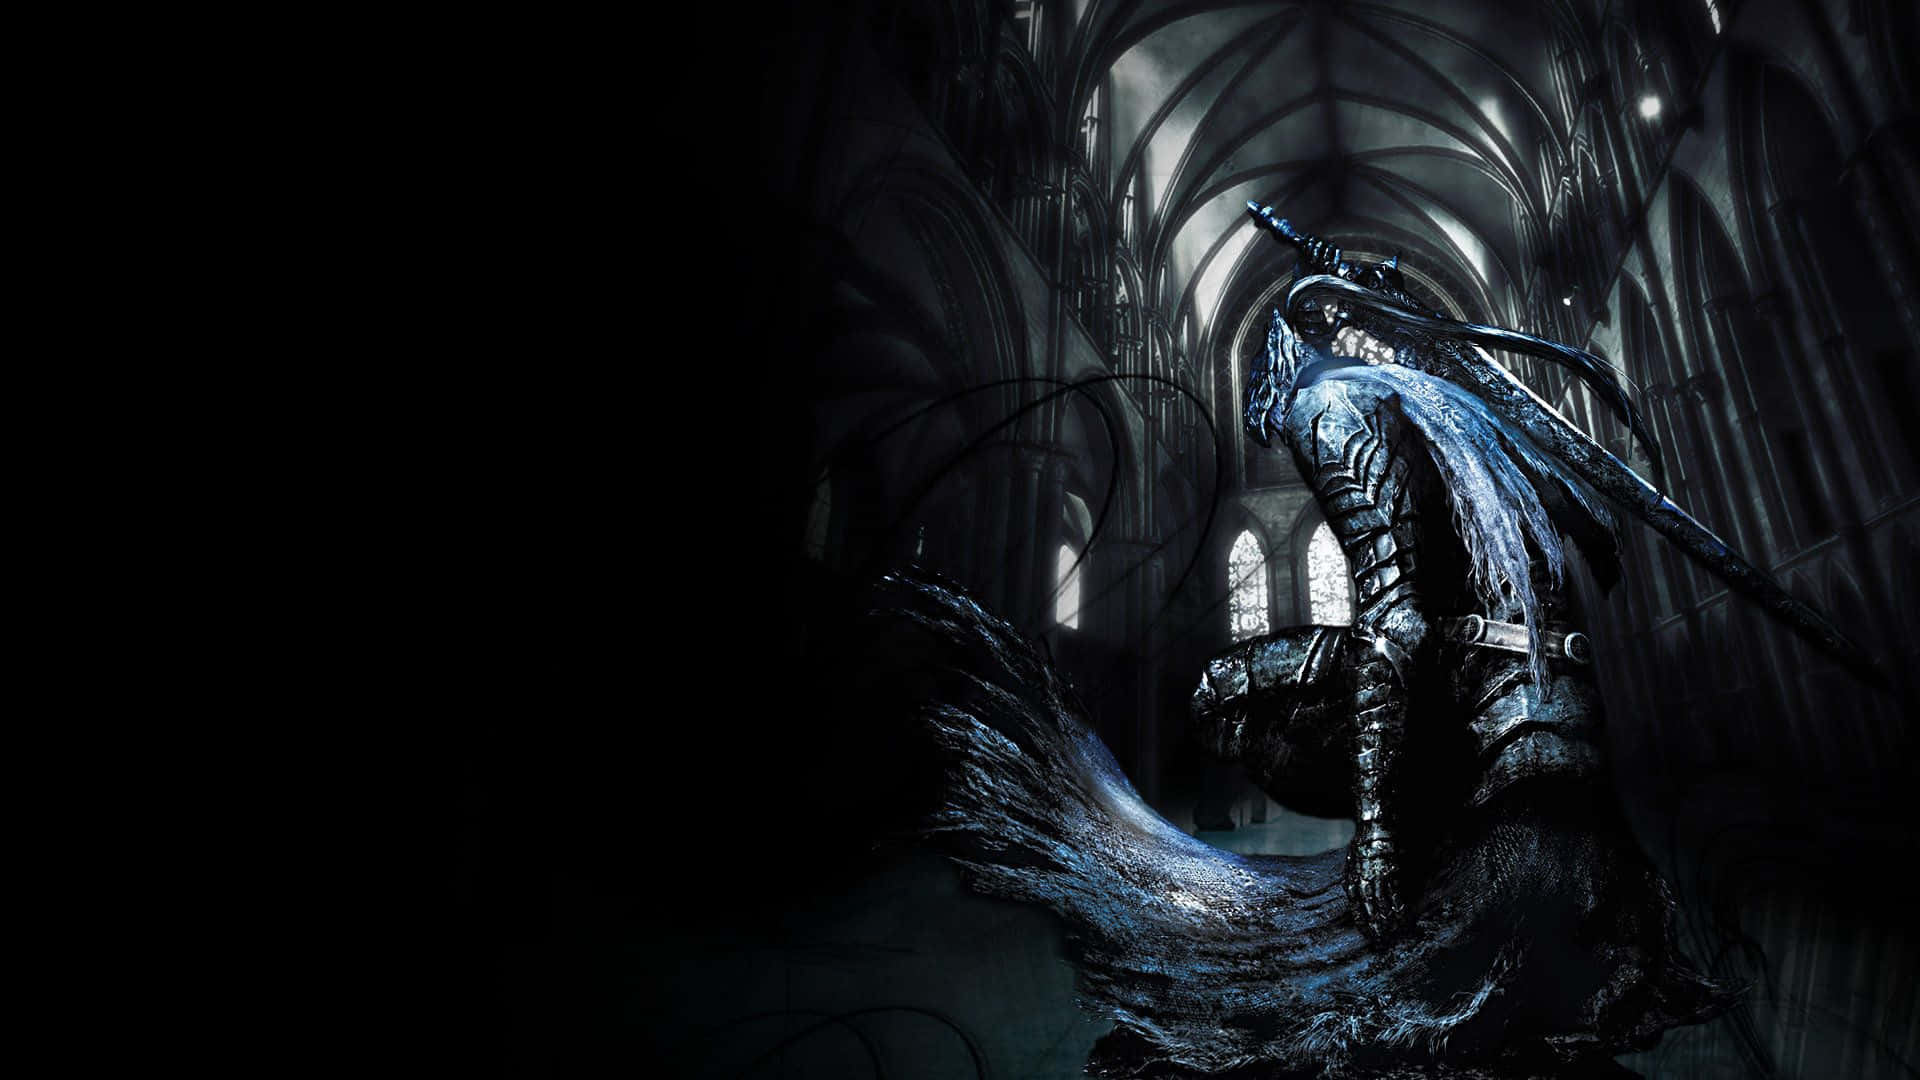 The mesmerizing Artorias The Abysswalker in action Wallpaper